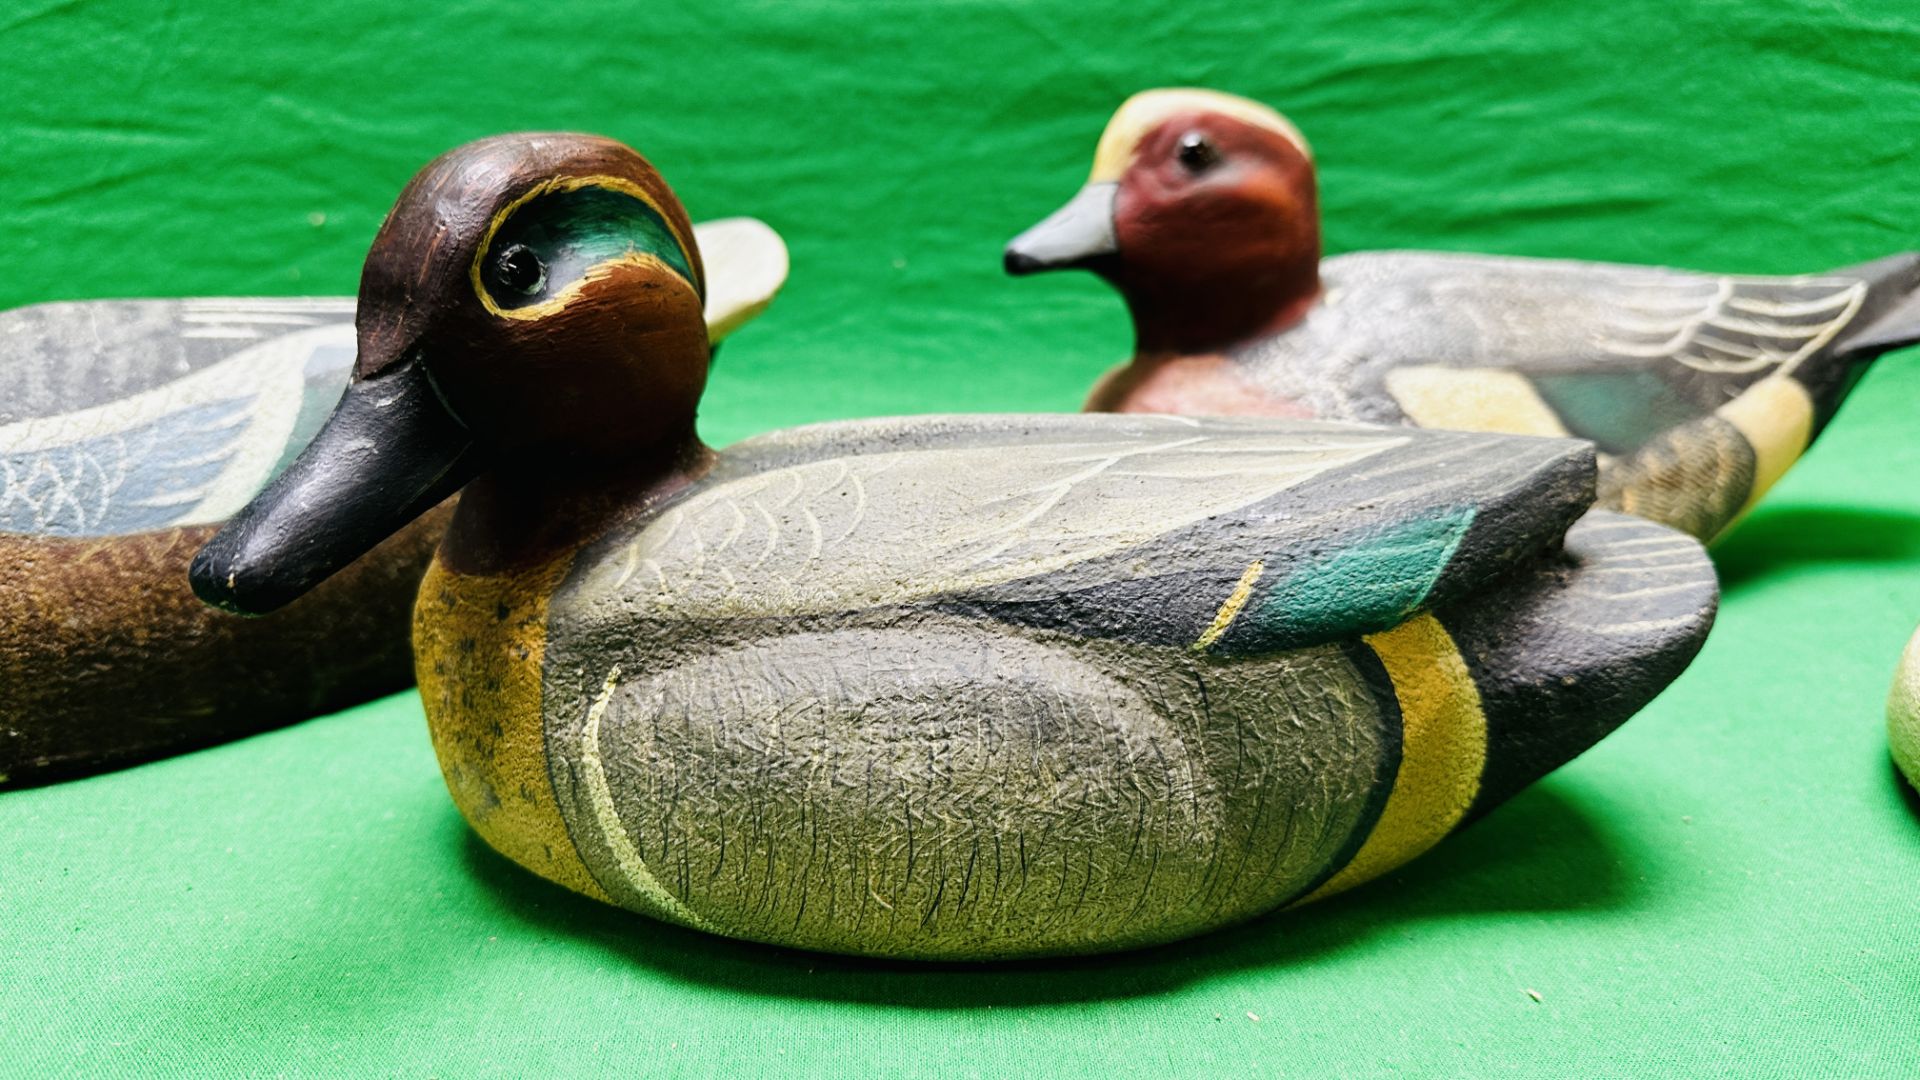 A HANDCRAFTED SET OF 4 DUCK DECOYS HAVING HANDPAINTED DETAIL AND GLASS EYES. - Image 2 of 13